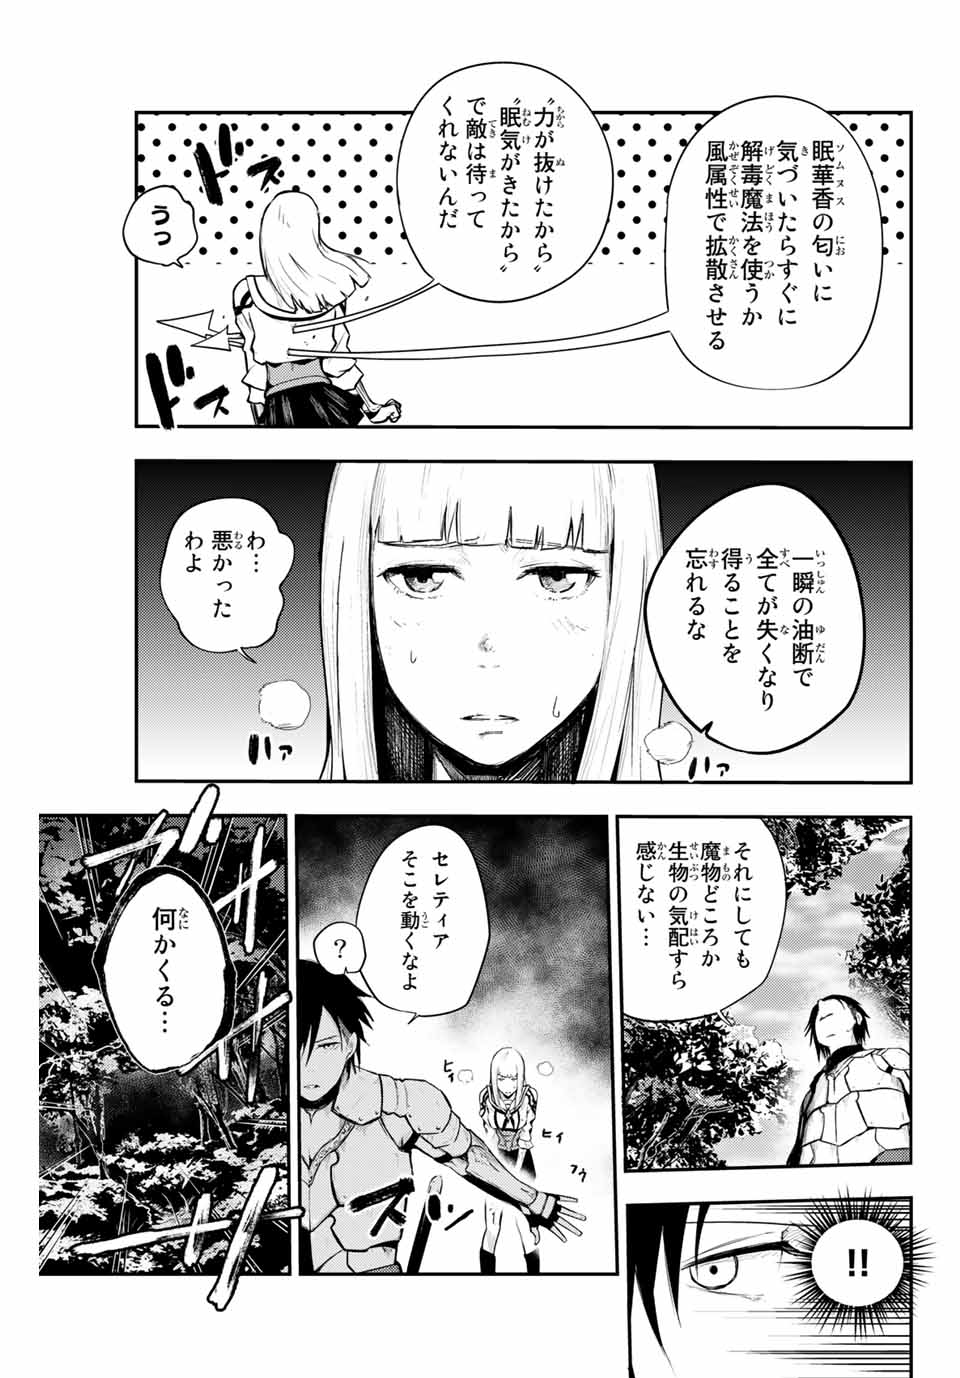 the strongest former prince-; 奴隷転生 ～その奴隷、最強の元王子につき～ 第6話 - Page 11